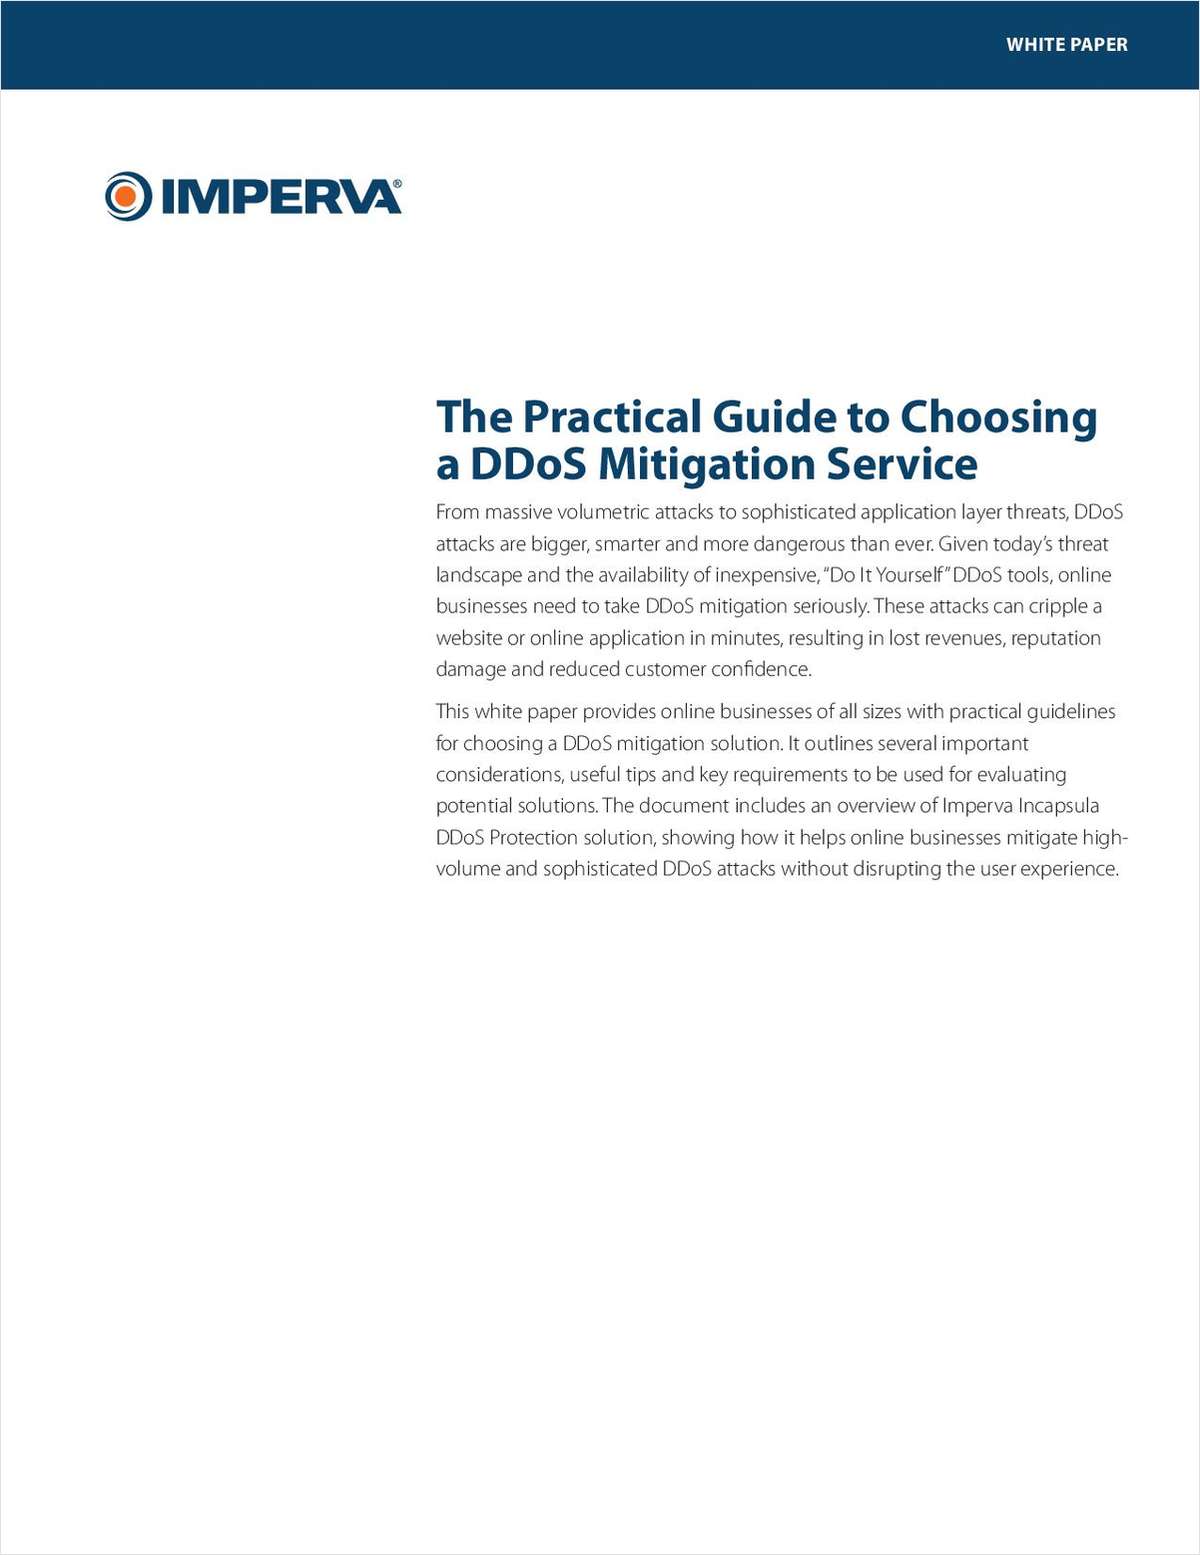 The Practical Guide to Choosing a DDoS Mitigation Service